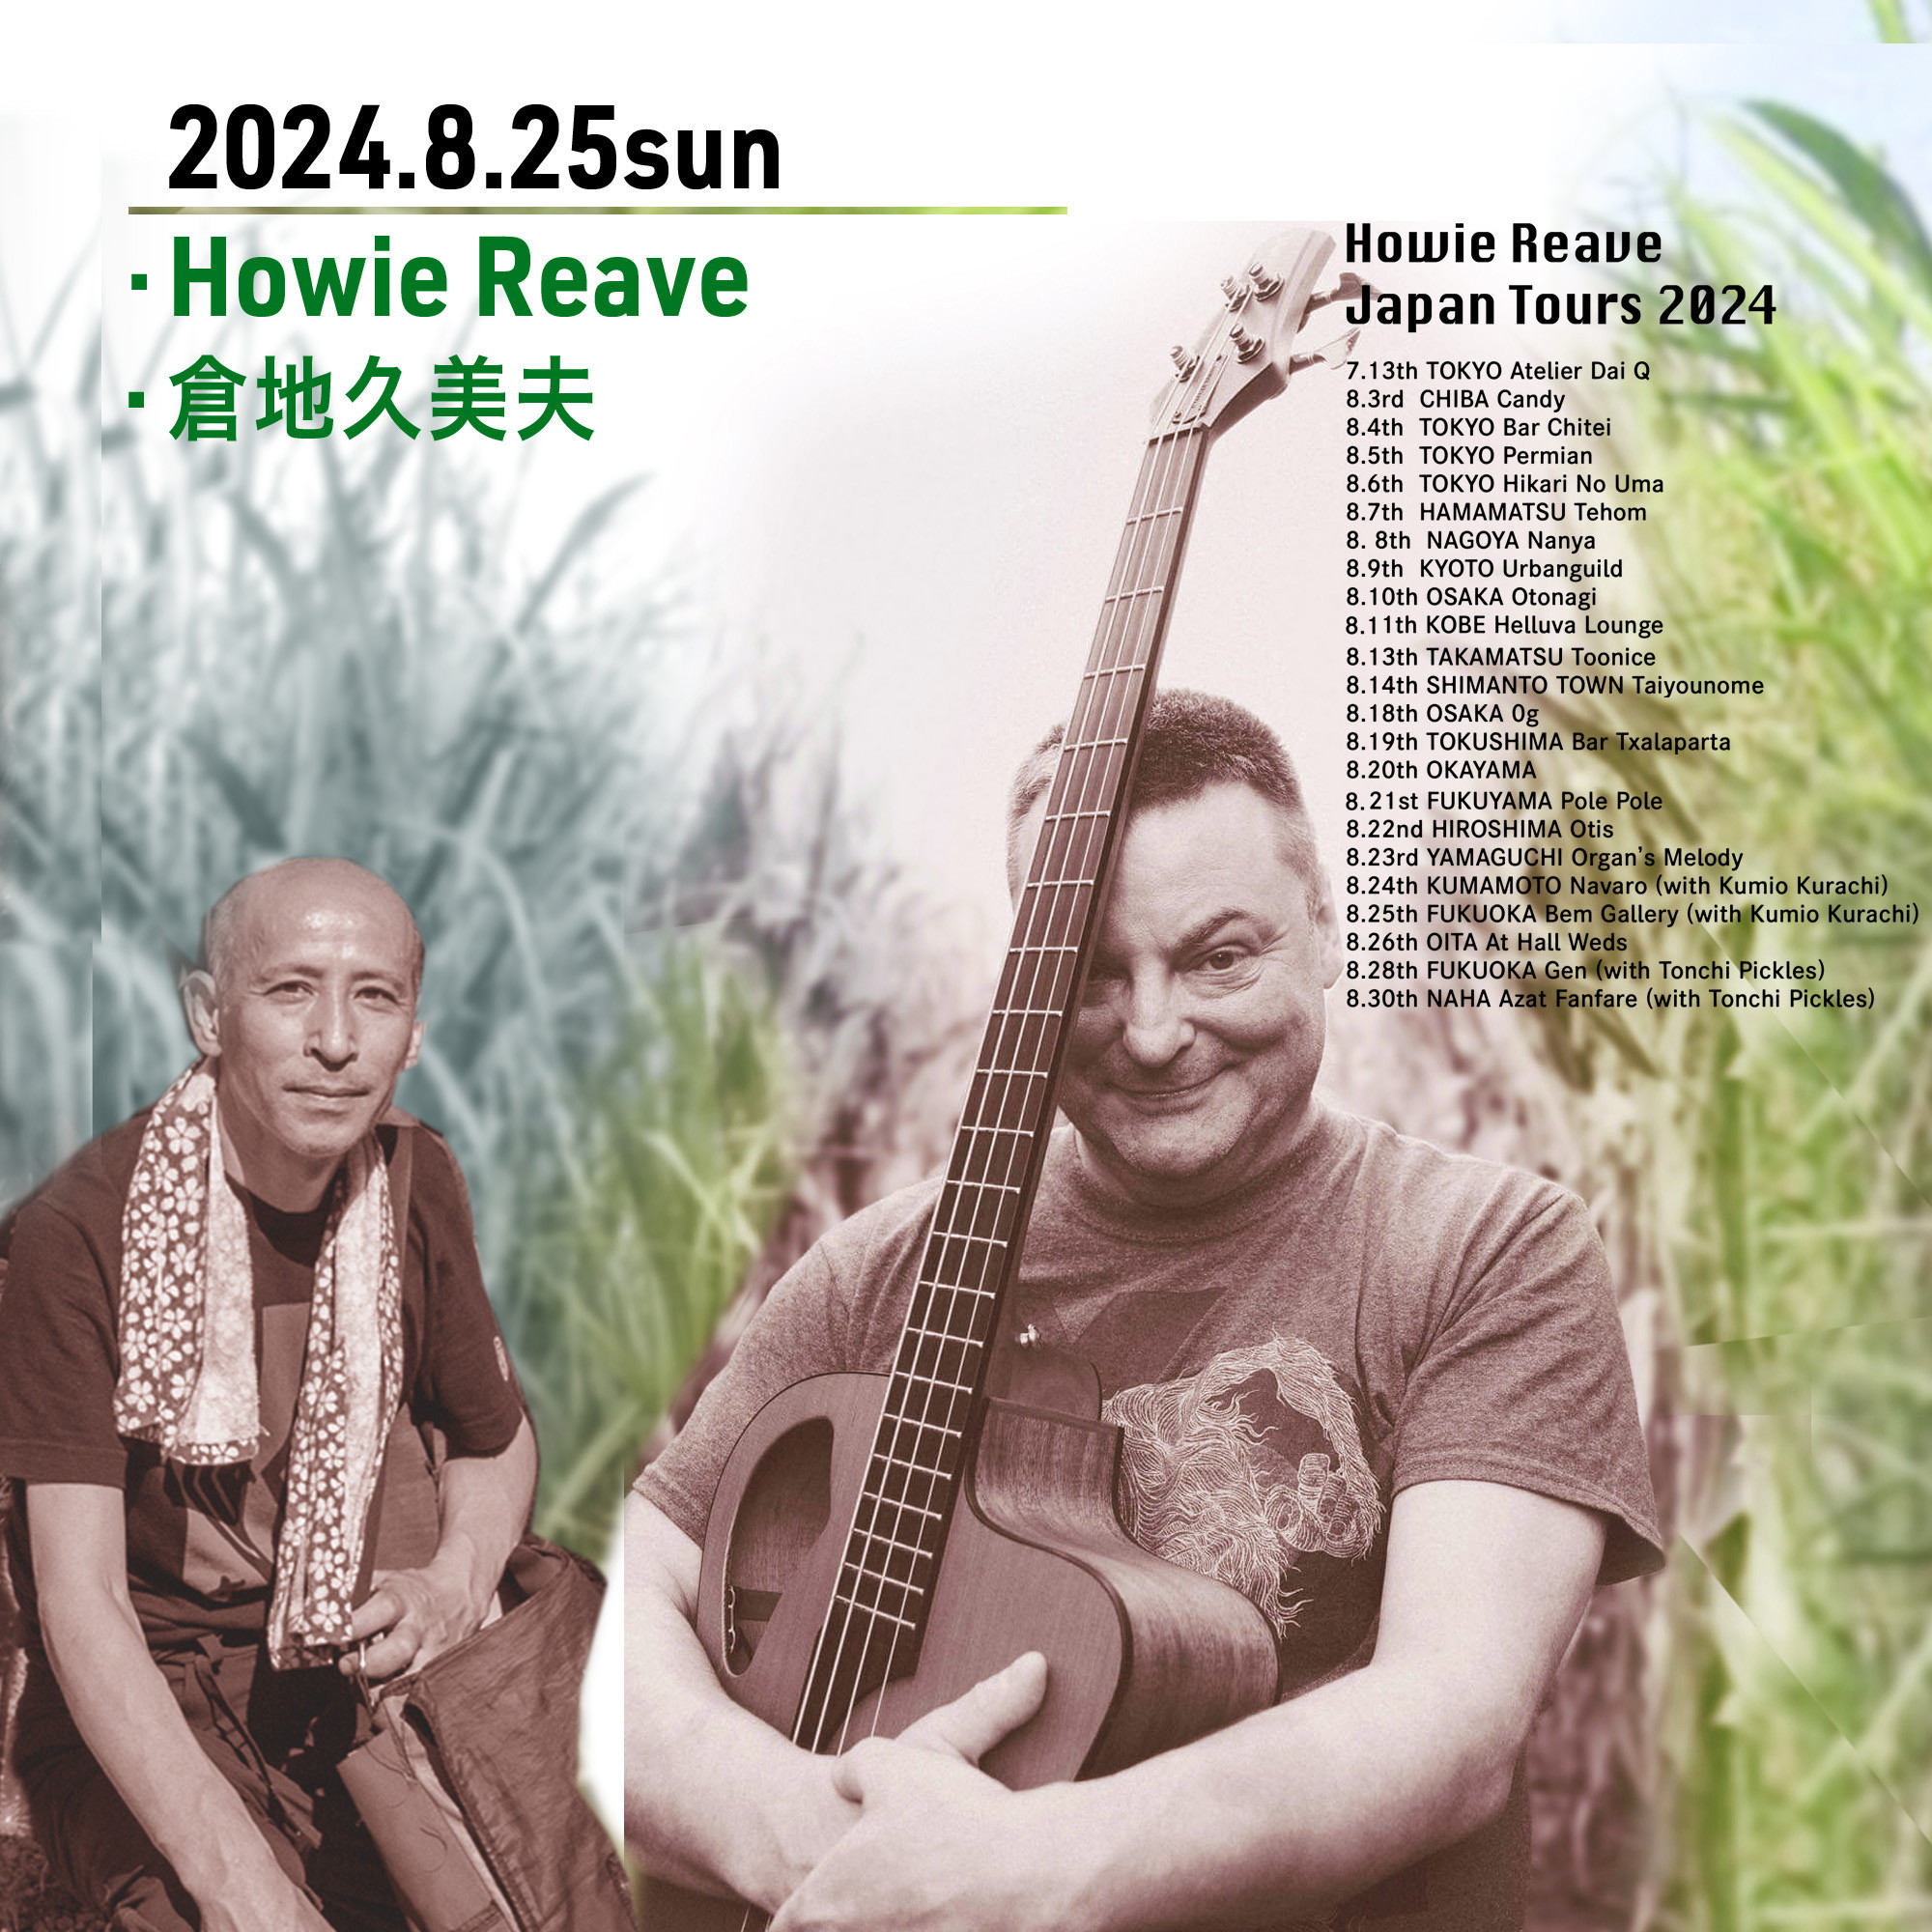 「HOWIE REEVE   2024年 夏のツアー」